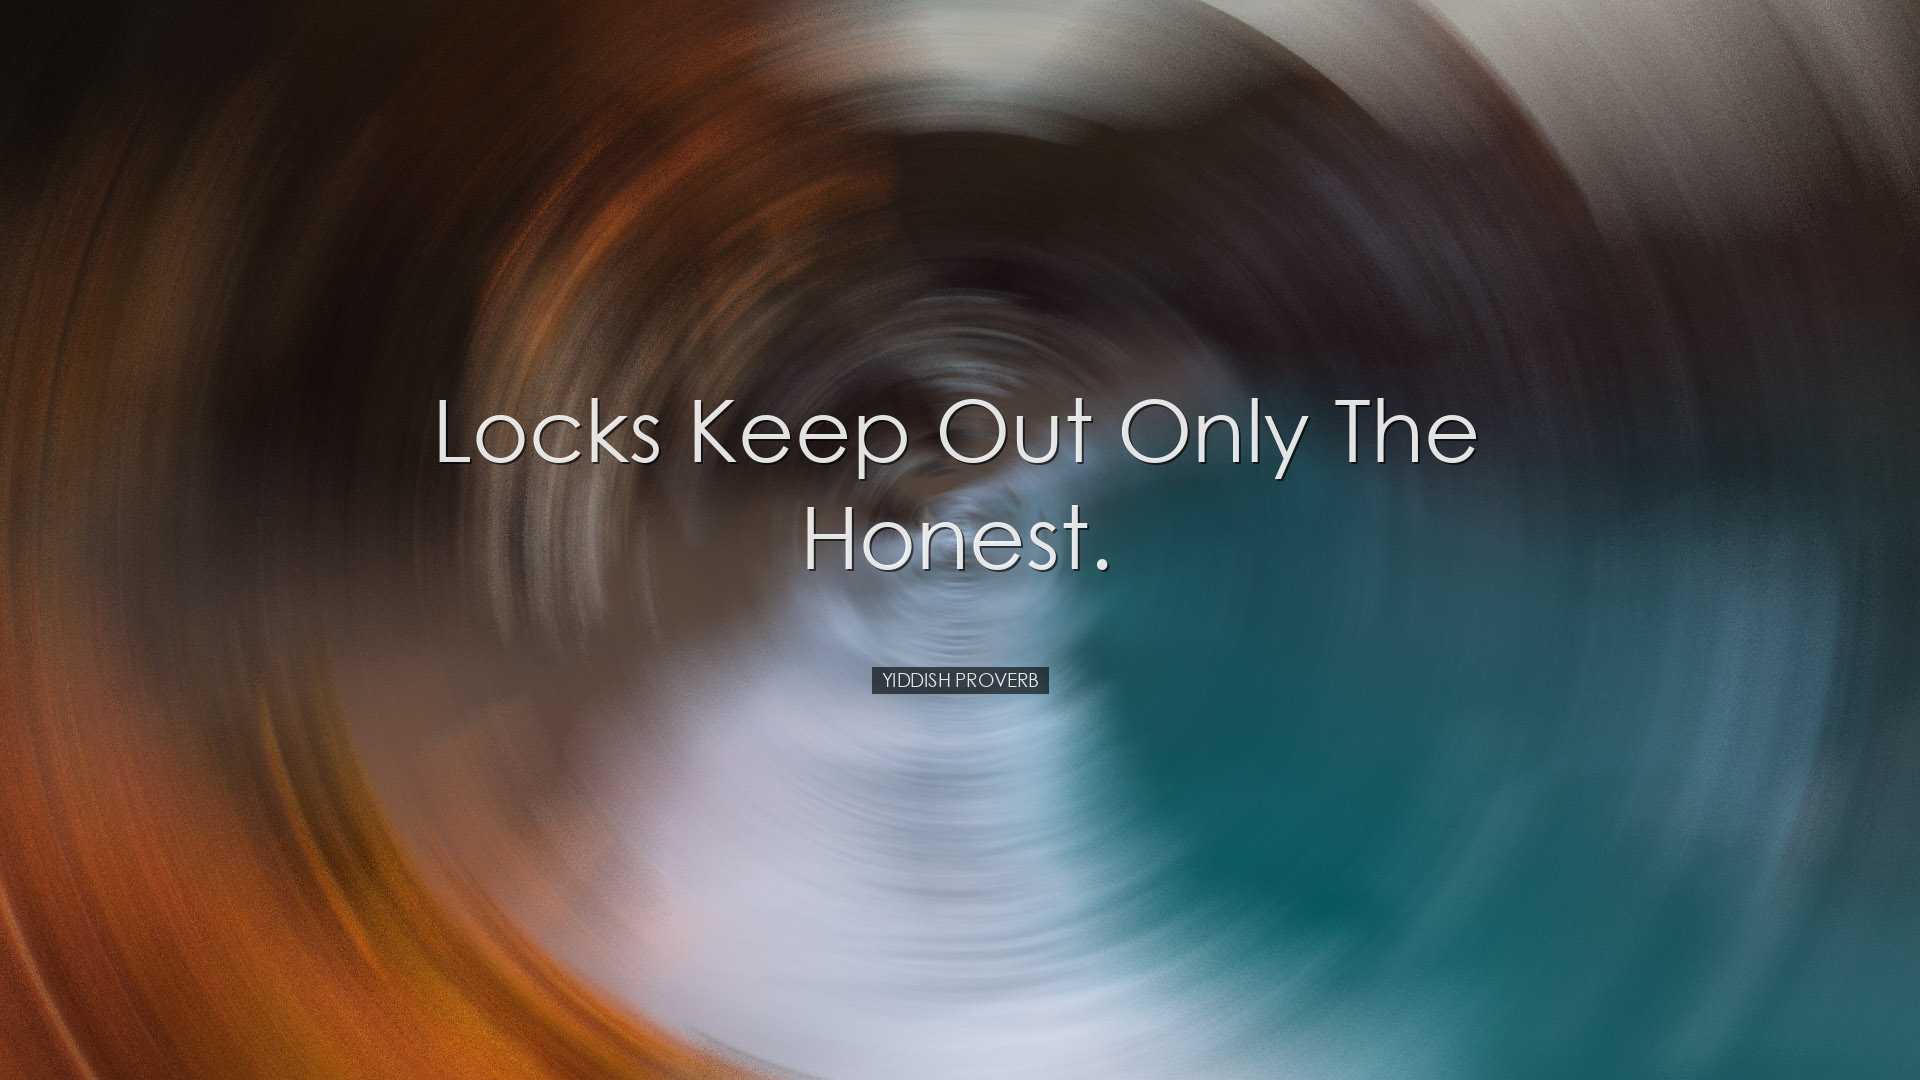 Locks keep out only the honest. - Yiddish Proverb